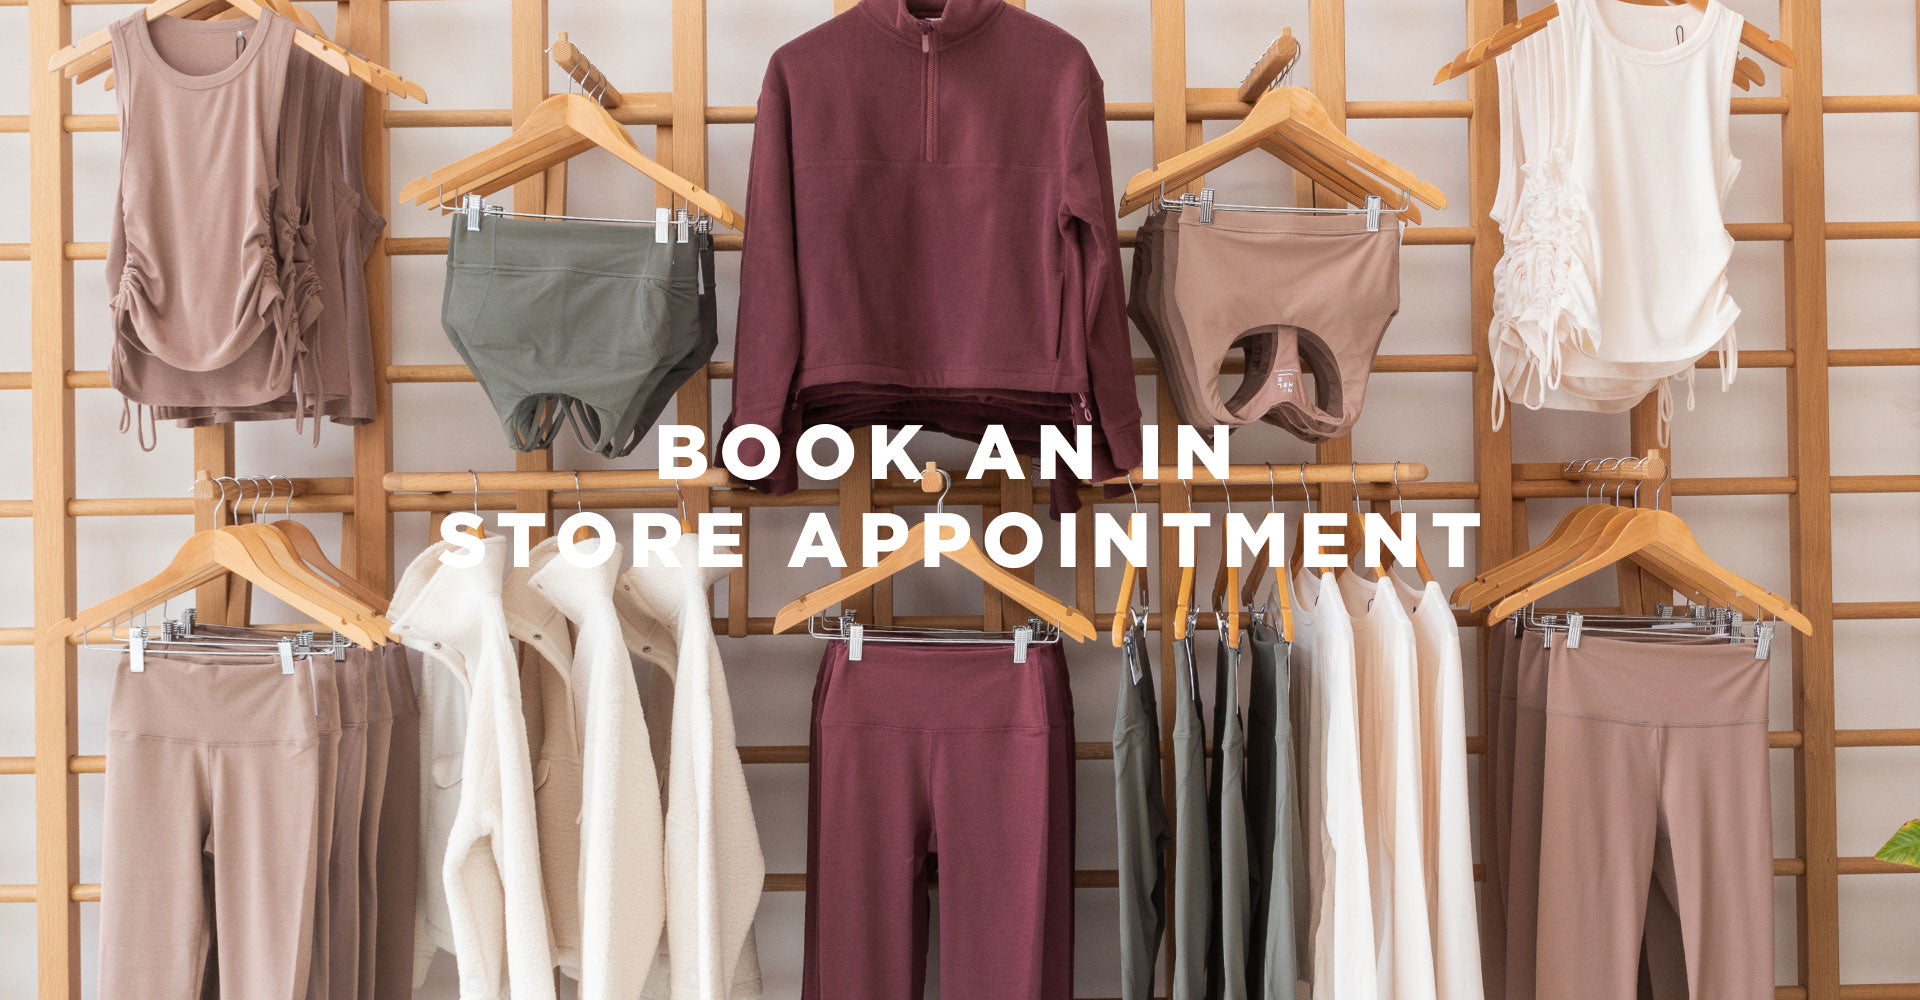 BOOK AN IN STORE APPOINTMENT